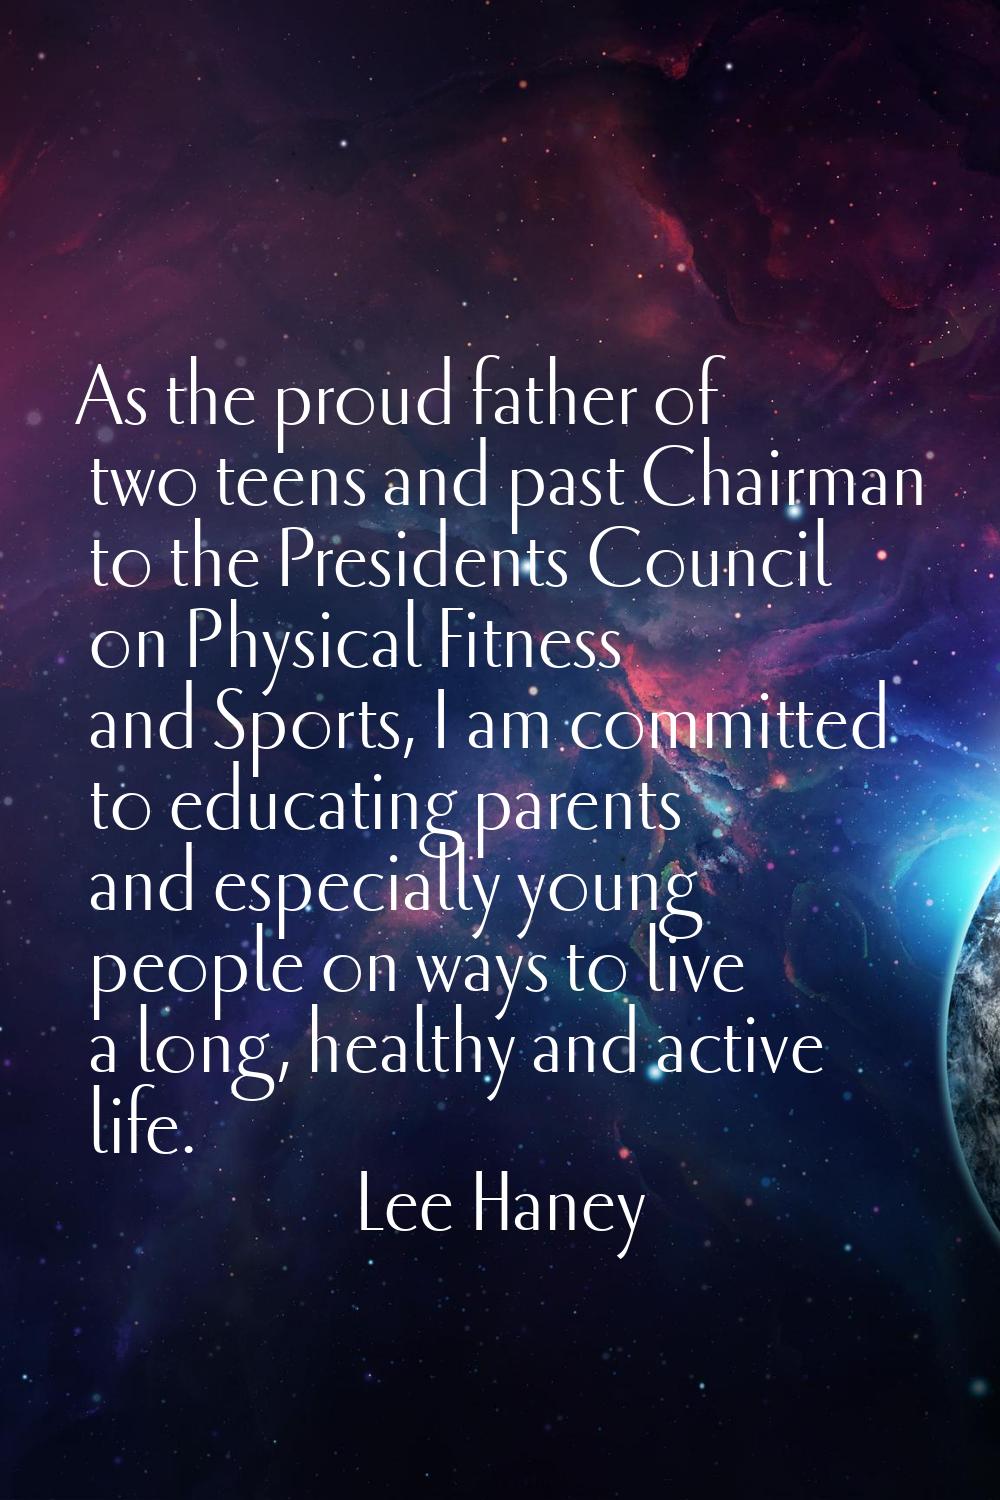 As the proud father of two teens and past Chairman to the Presidents Council on Physical Fitness an